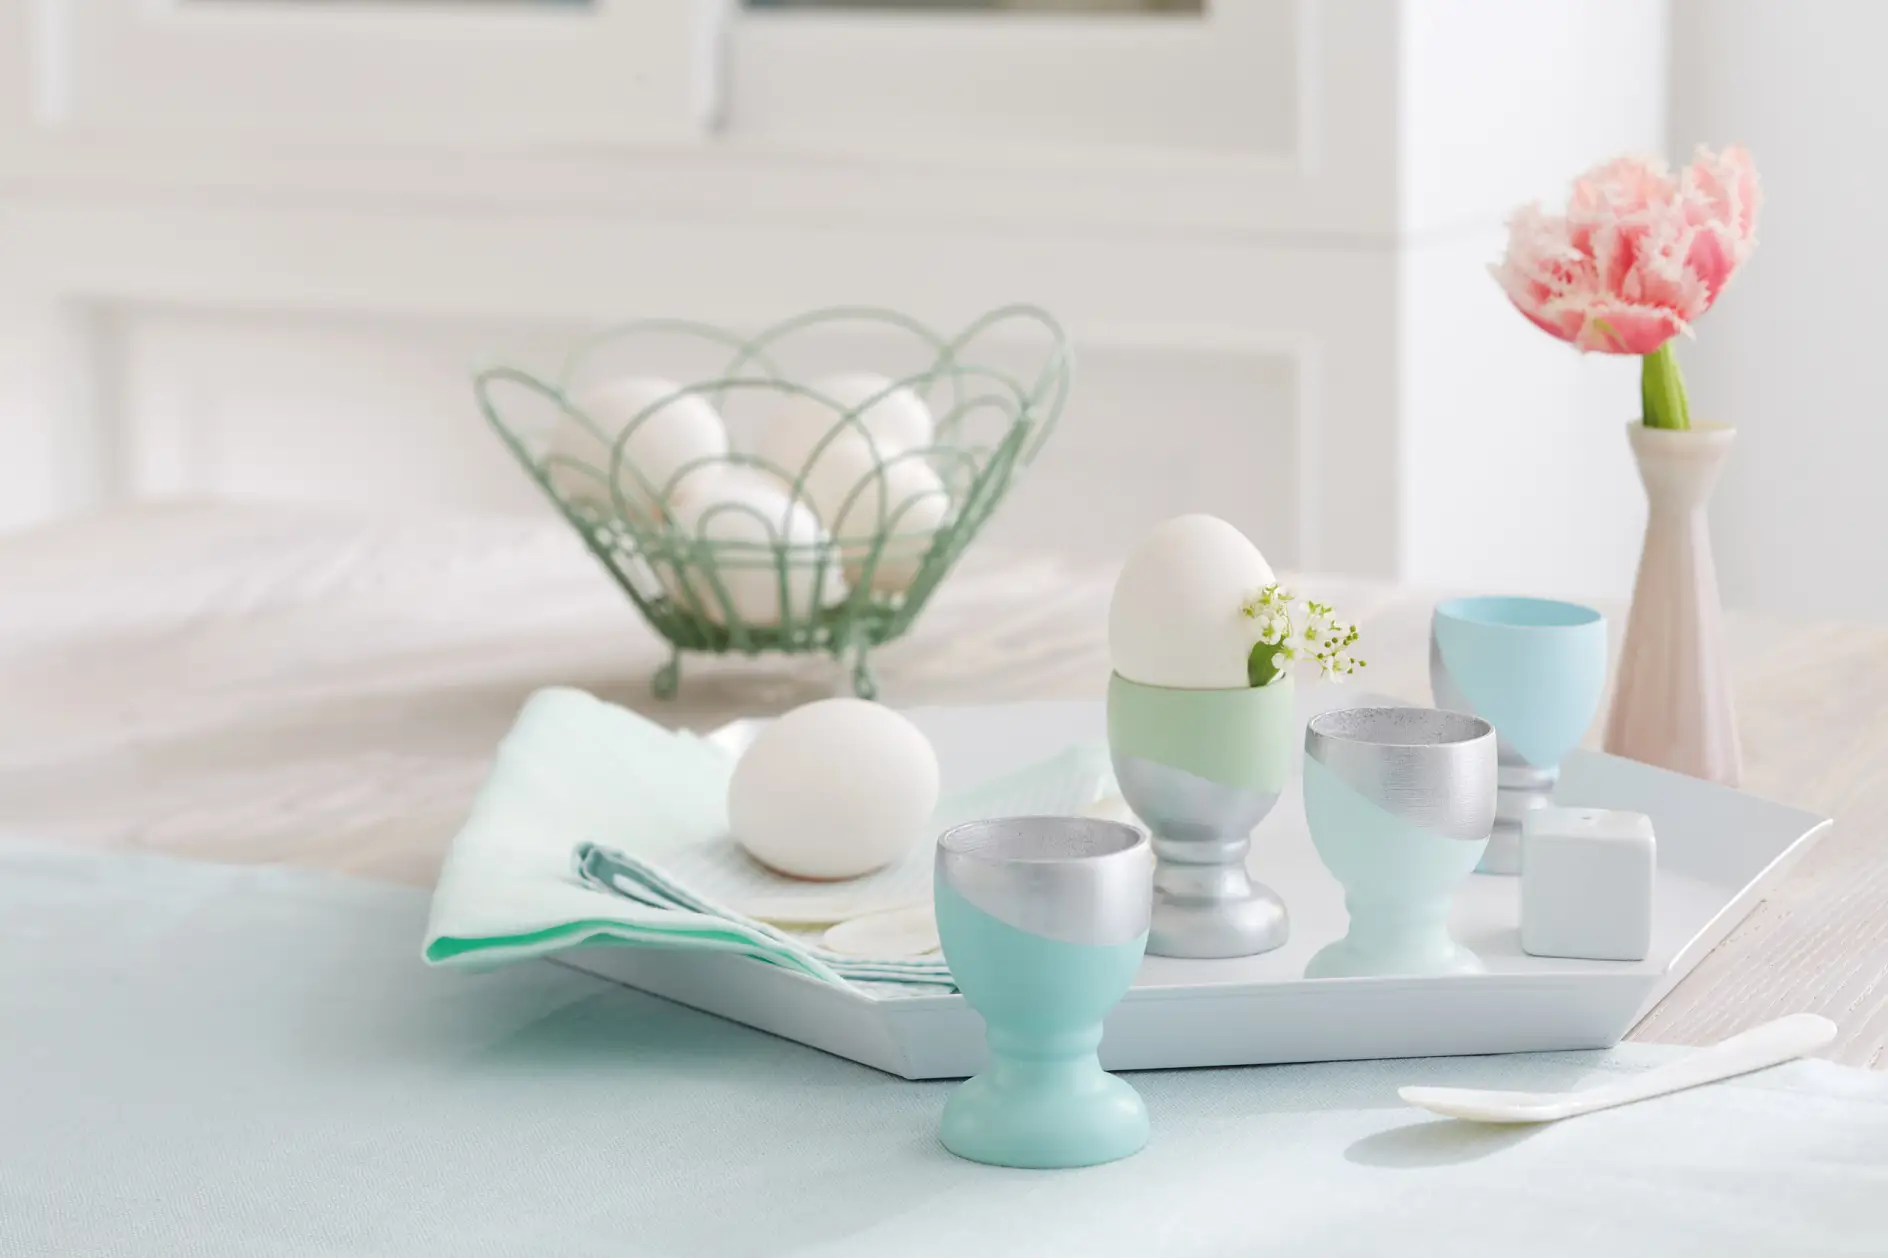 Wow, they're so cool: On one hand, the trendy egg cups feature delicate colors; on the other hand, they play cool in metallic silver.